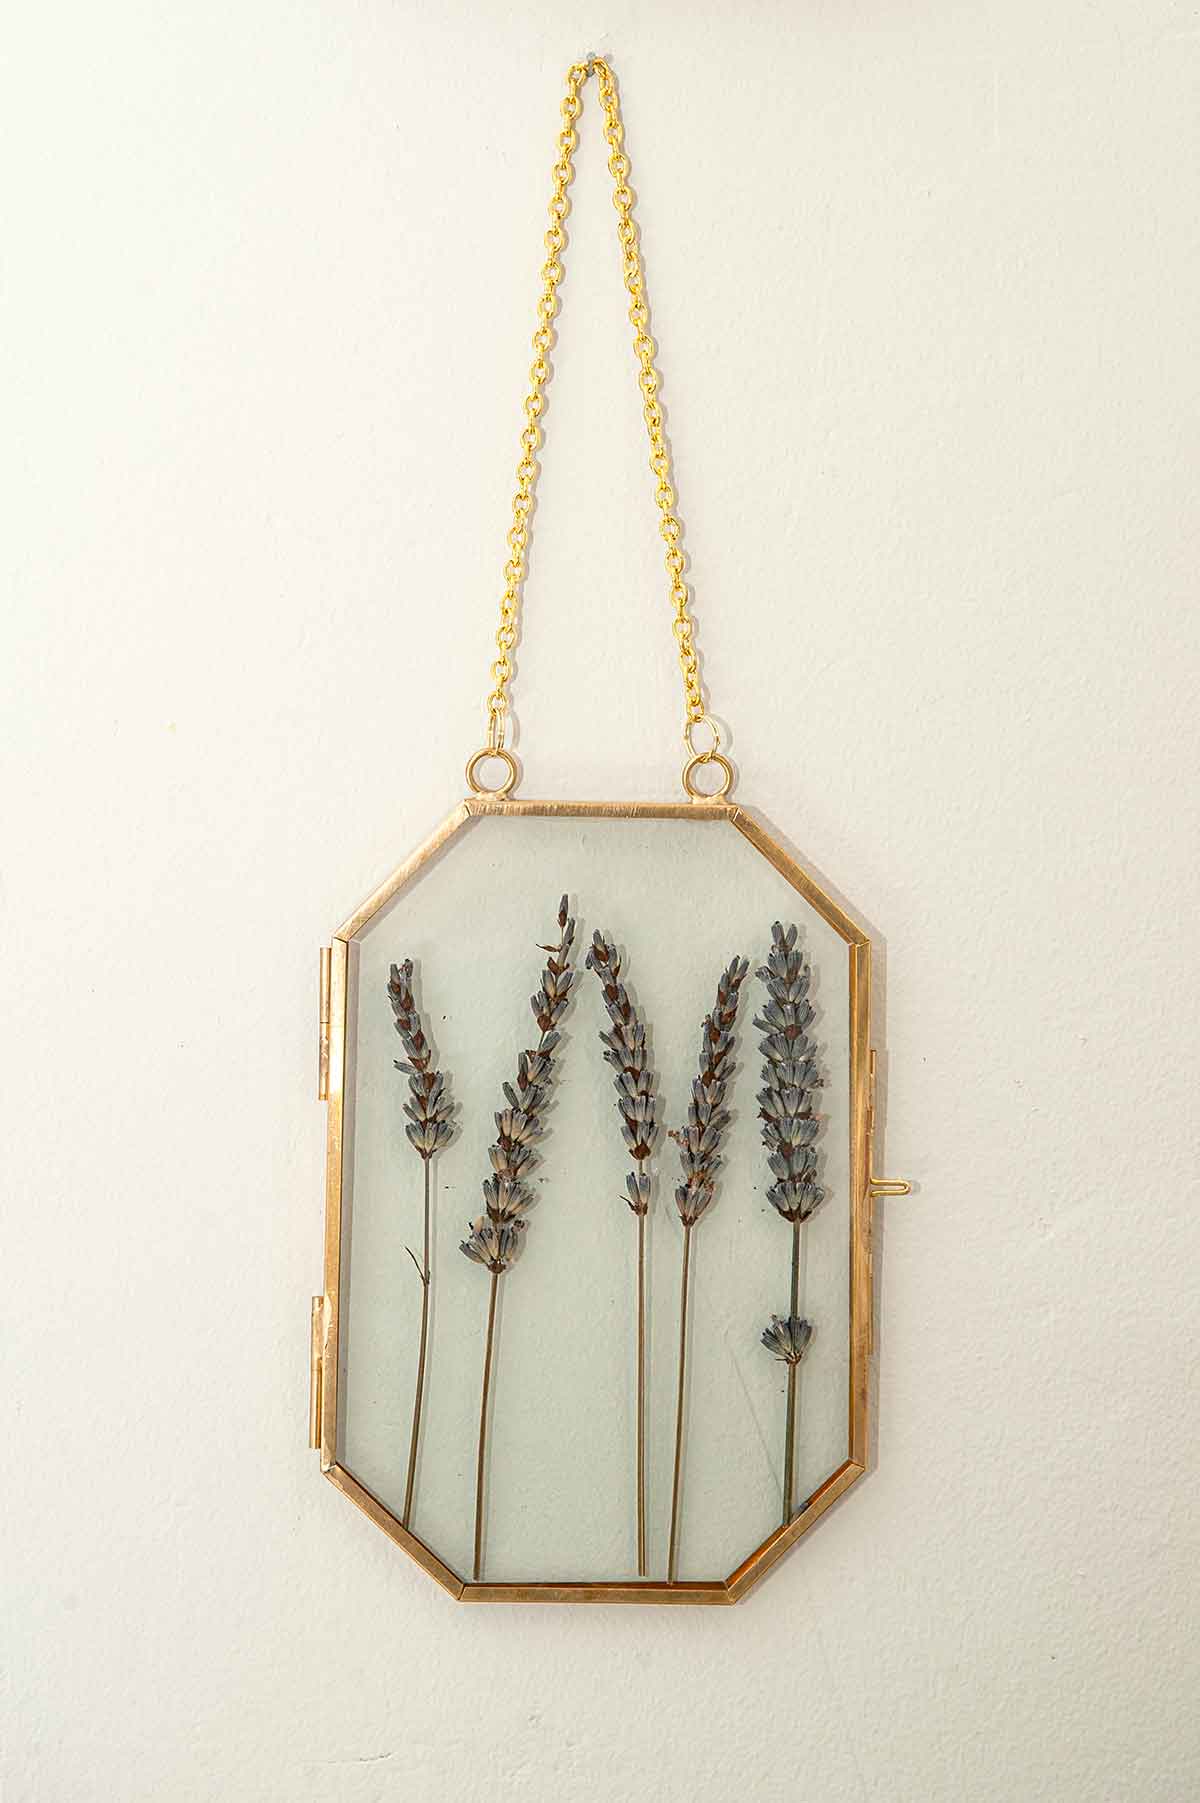 A clear frame with 5 sprigs of lavender on a wall.